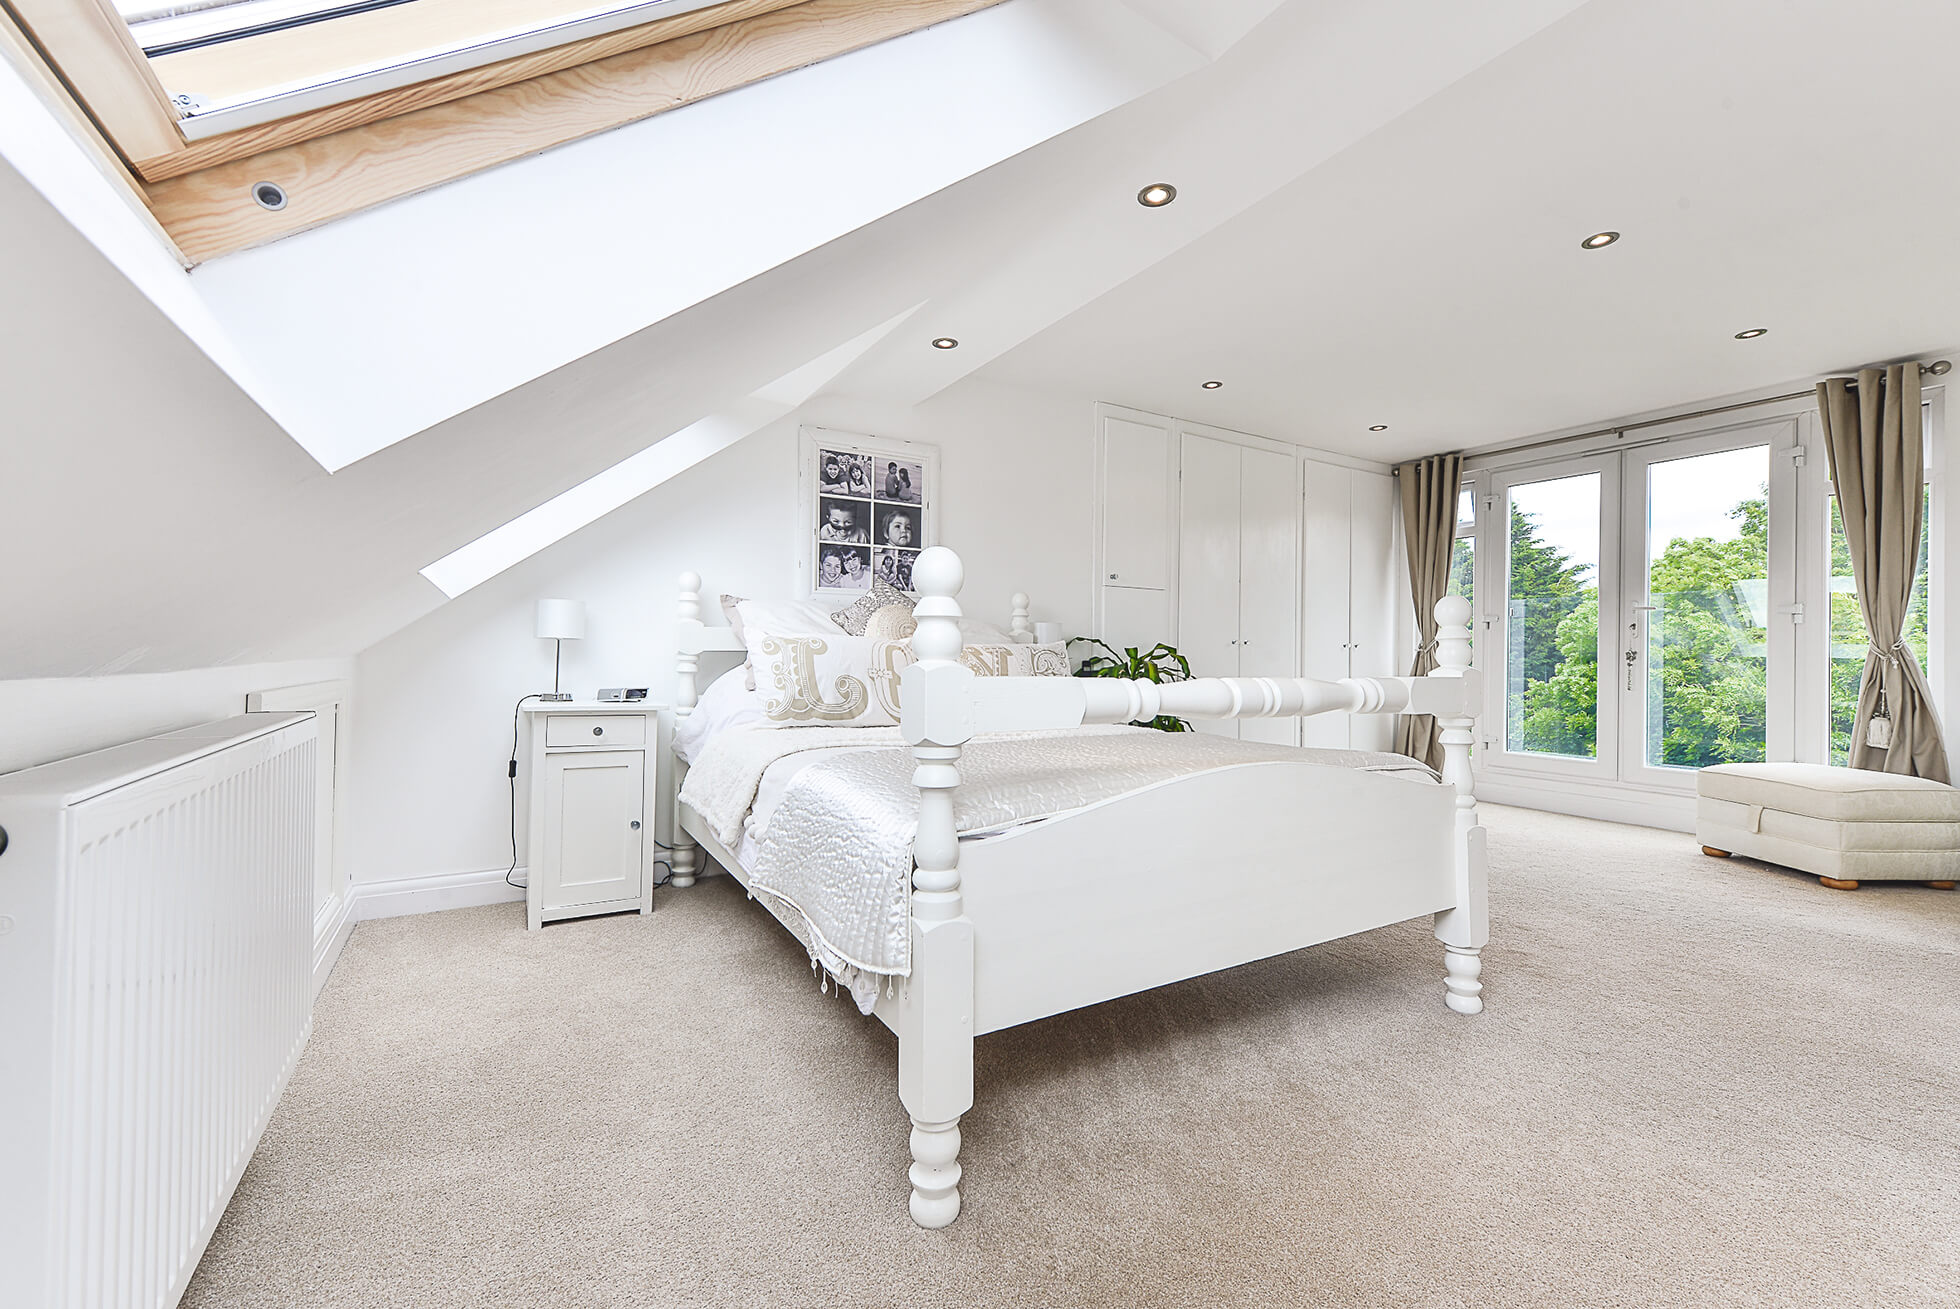 Do you have a question about converting your Loft in Bragbury End? Here are the most popular questions asked by our clients.